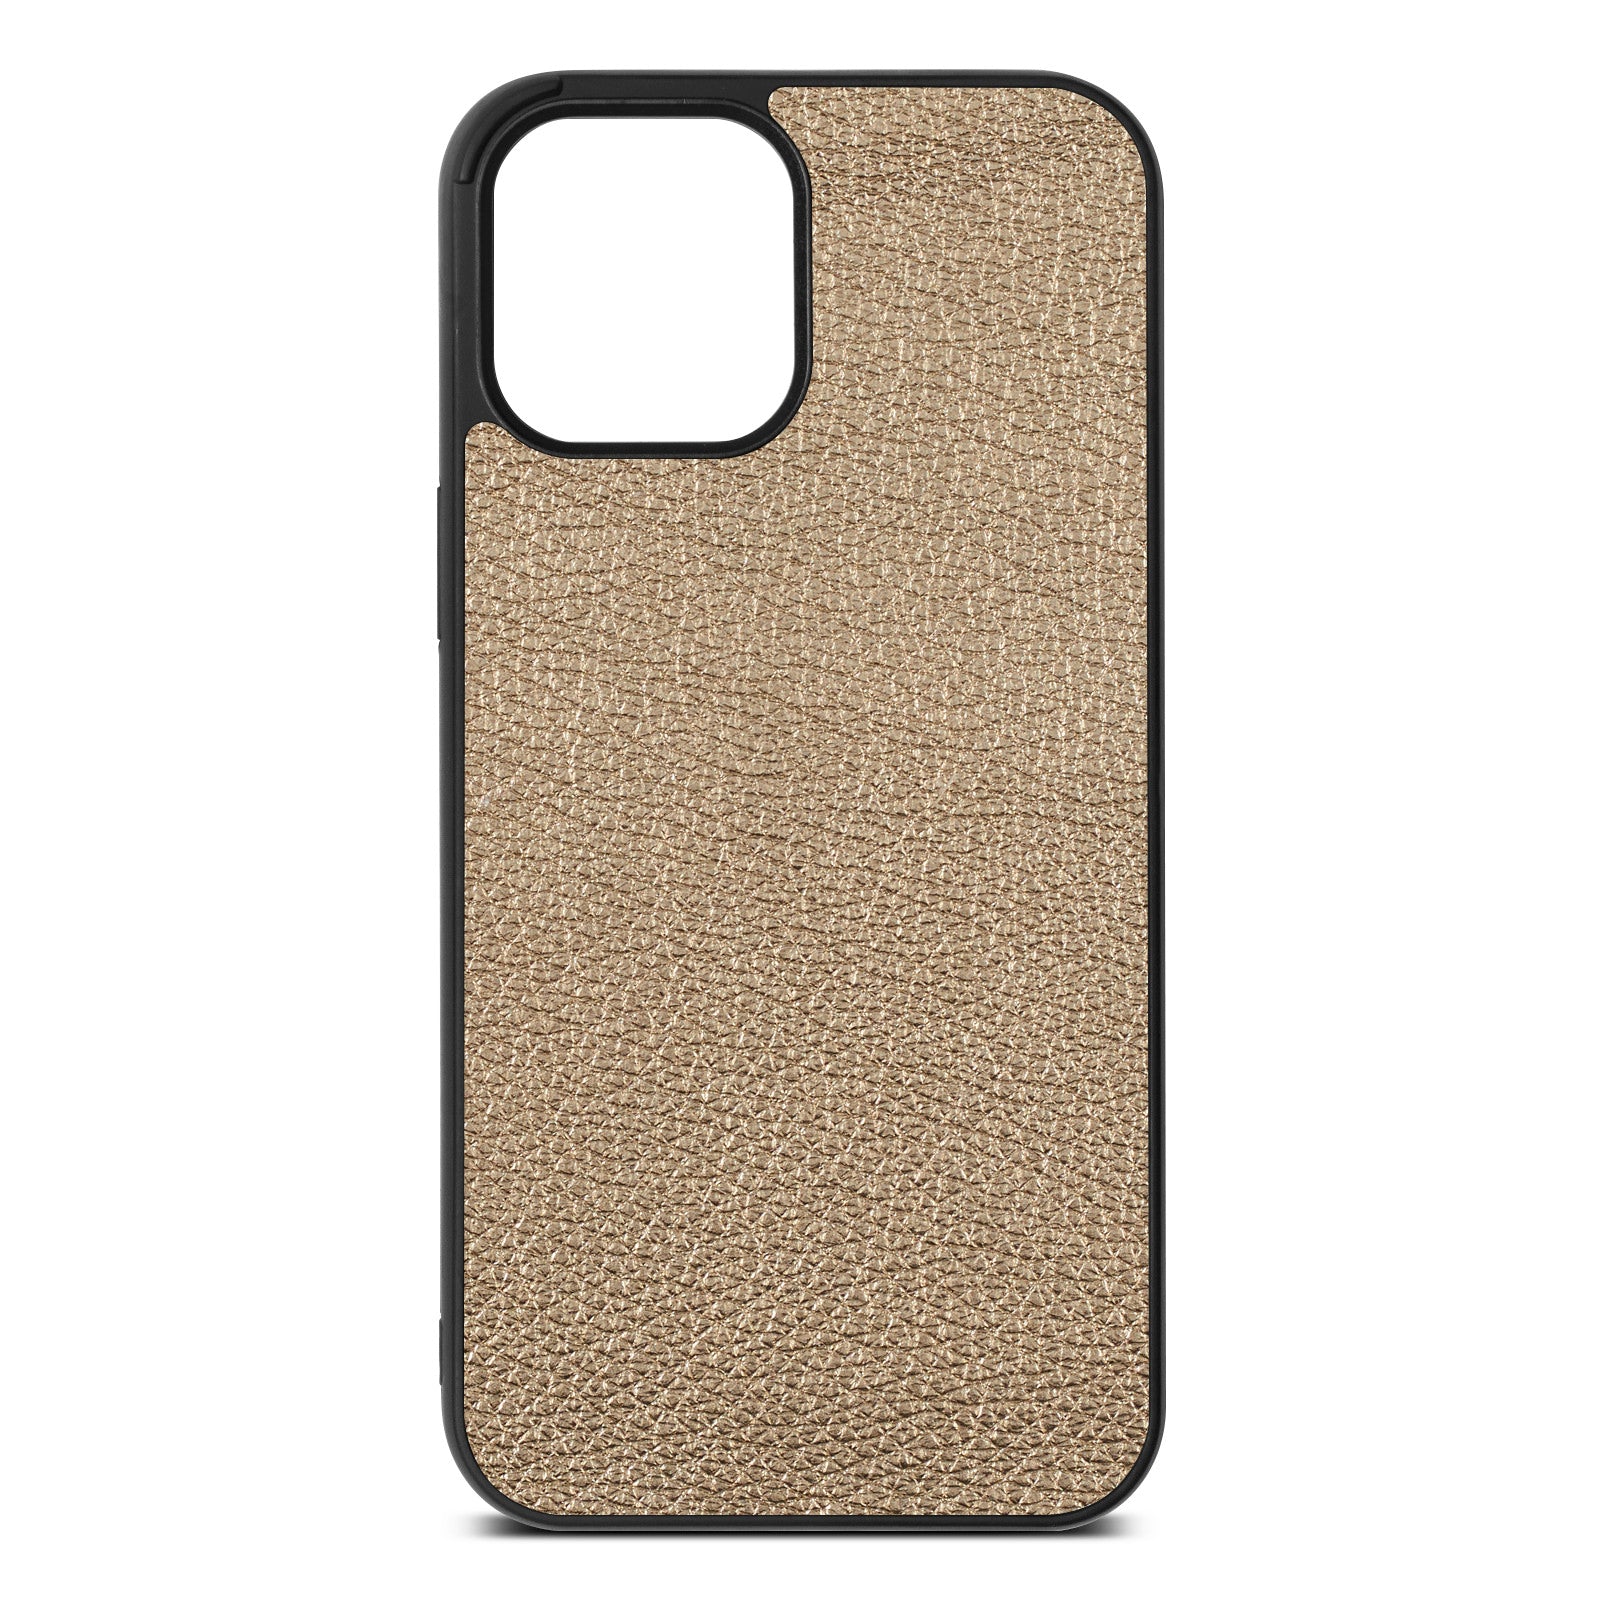 Blank iPhone 12 Pro Max Gold Pebble Leather iPhone Case